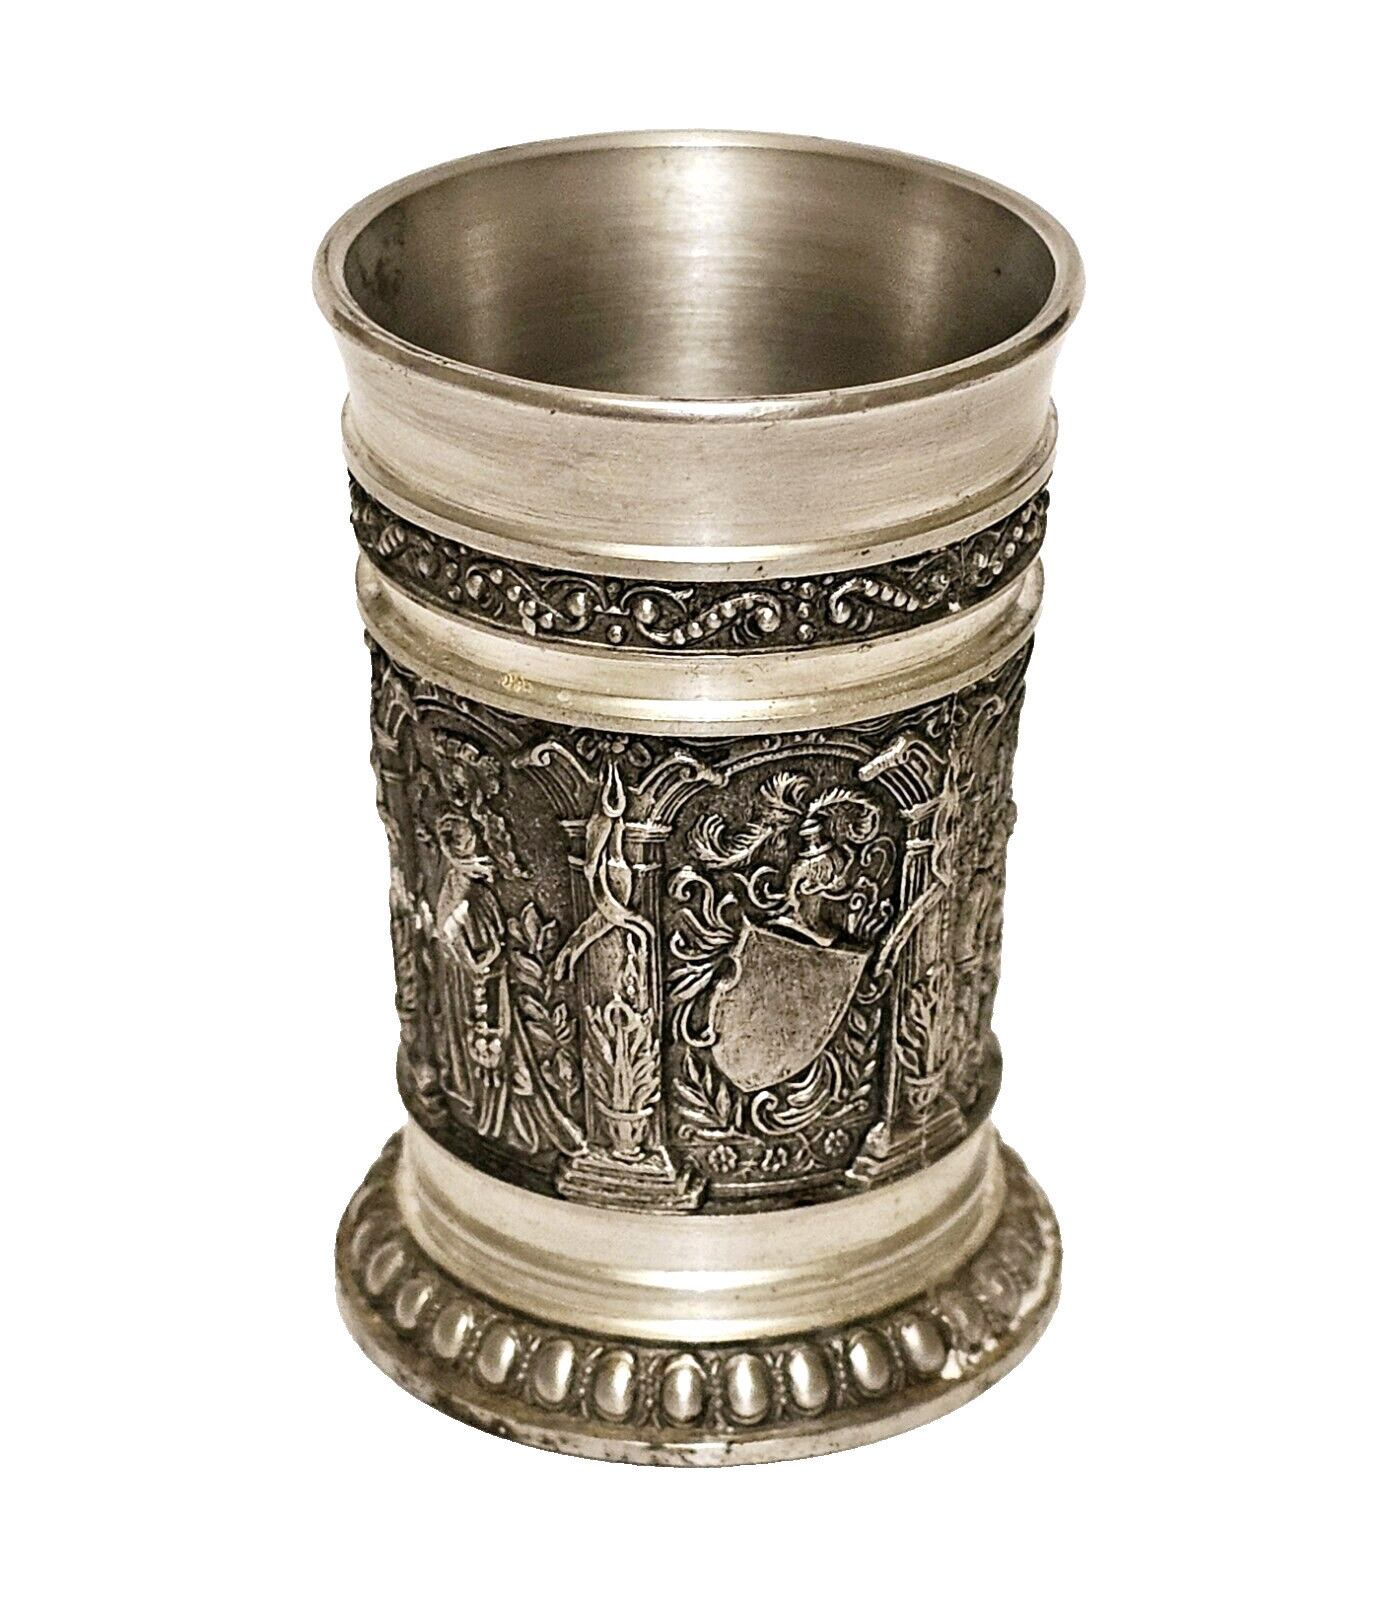 BMF ZINN - 97% Pewter Knights Shot Glass Shooter Raised Relief Made in Germany